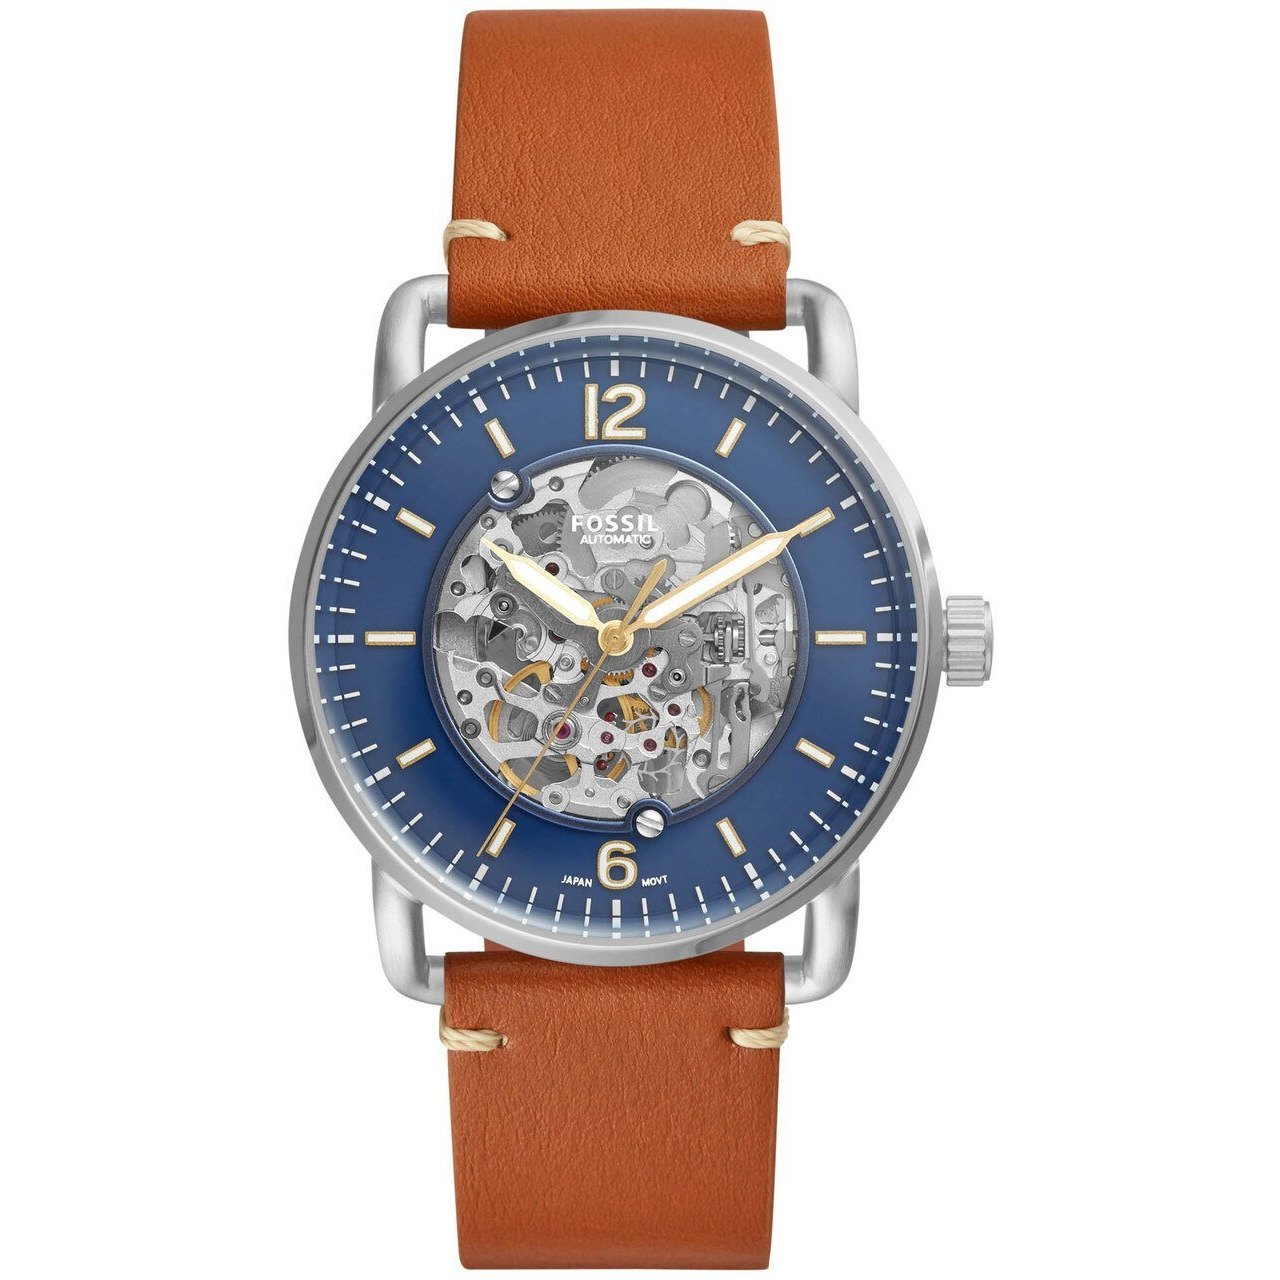 Fossil ME3159 Commuter Automatic Blue Tan Leather